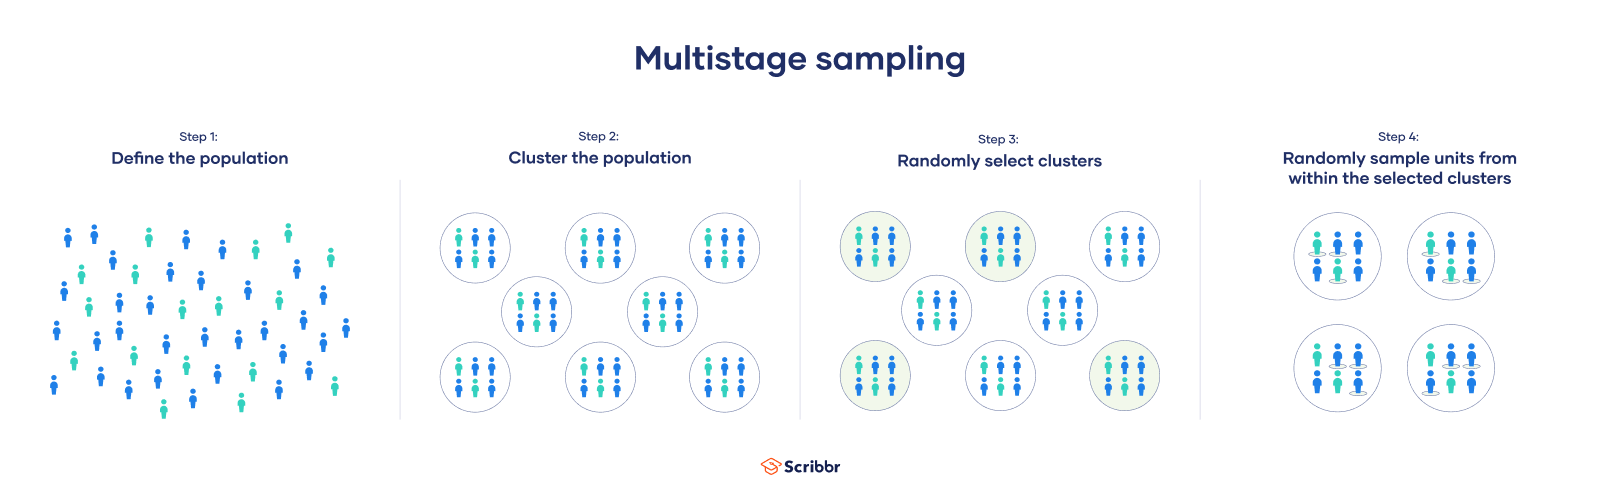 Multistage Sampling  Introductory Guide & Examples